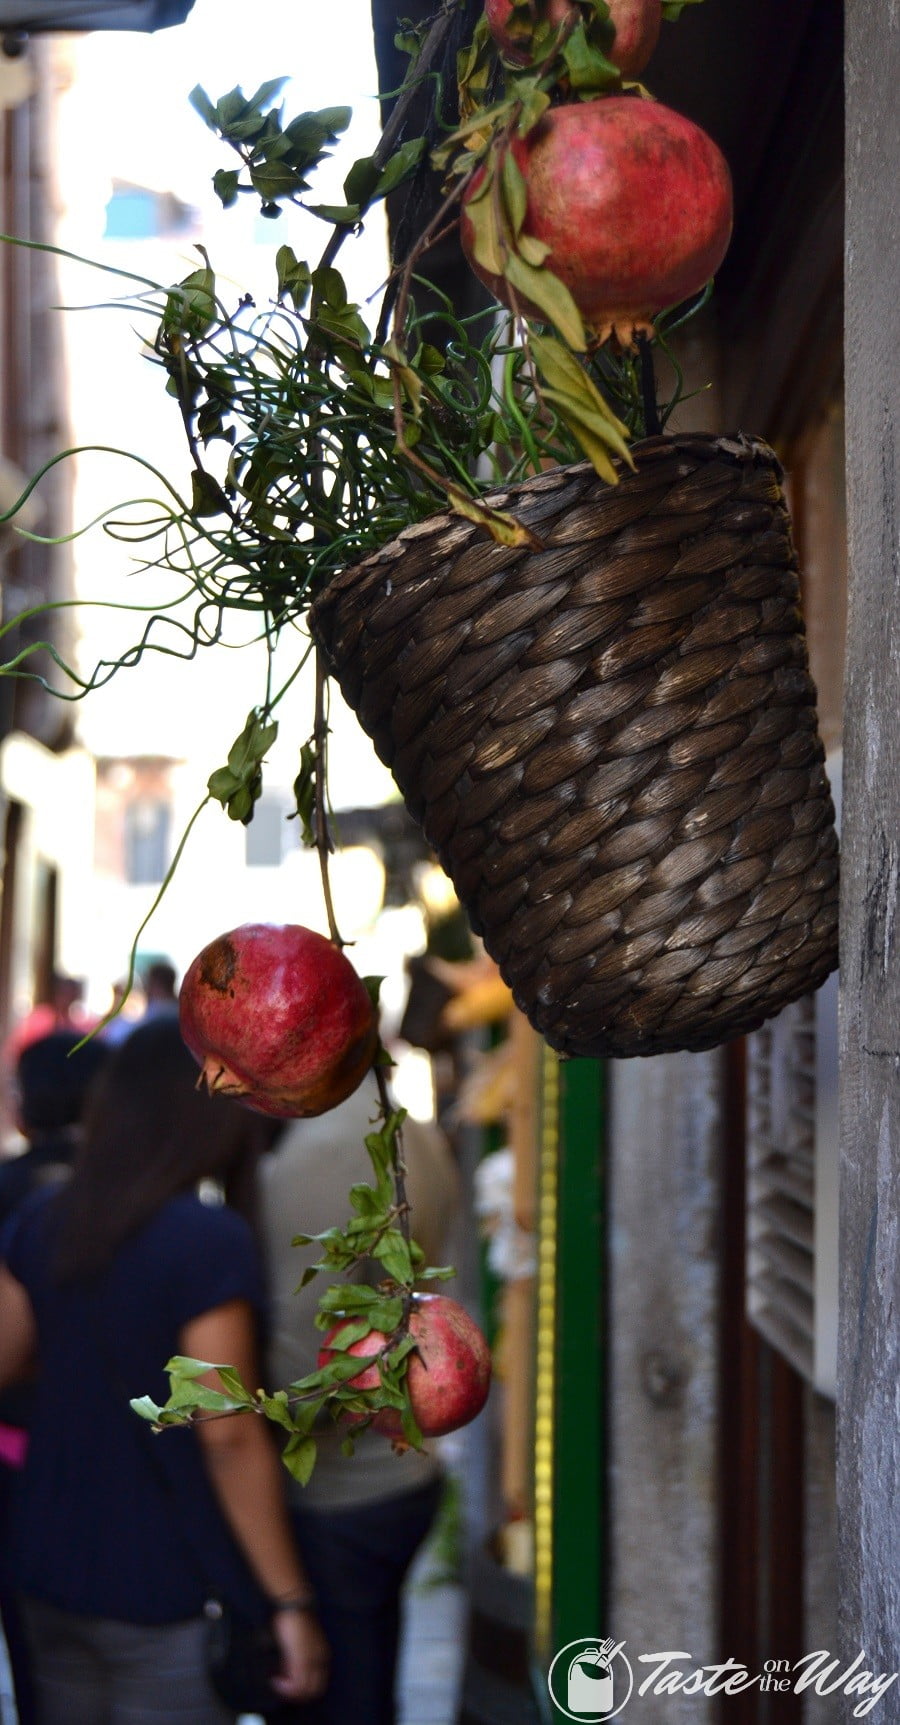 One of the top 10 fun #ThingsToDo in #Venice, #Italy is to observe the little details. Check out for more! #travel #photography @tasteontheway